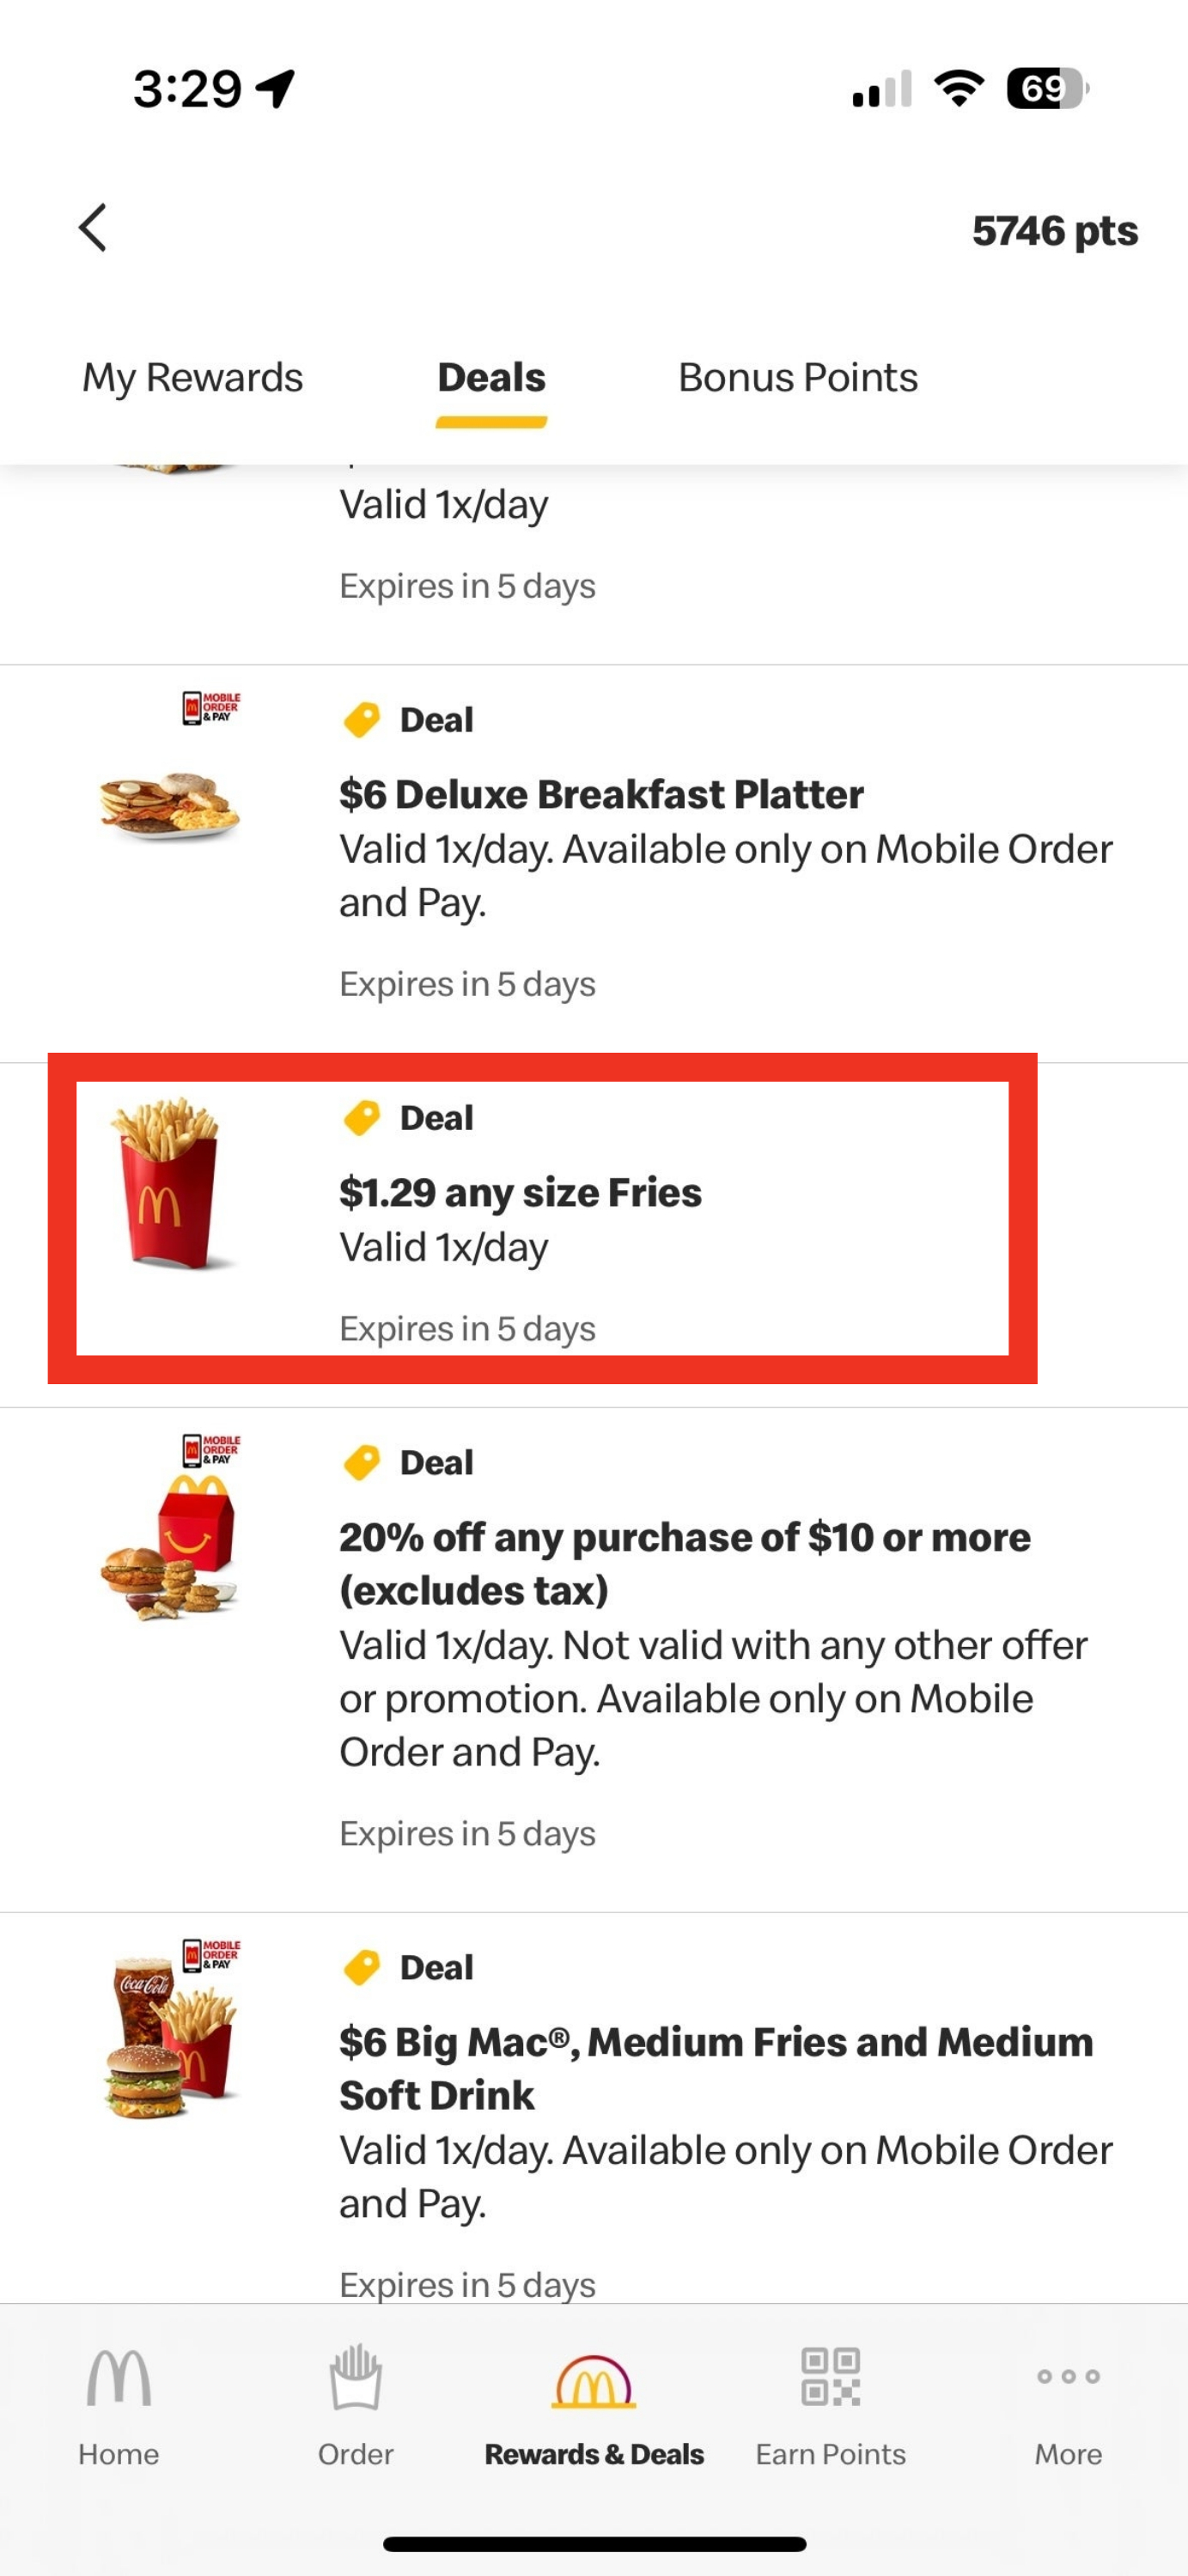 the daily deal highlighted on the app